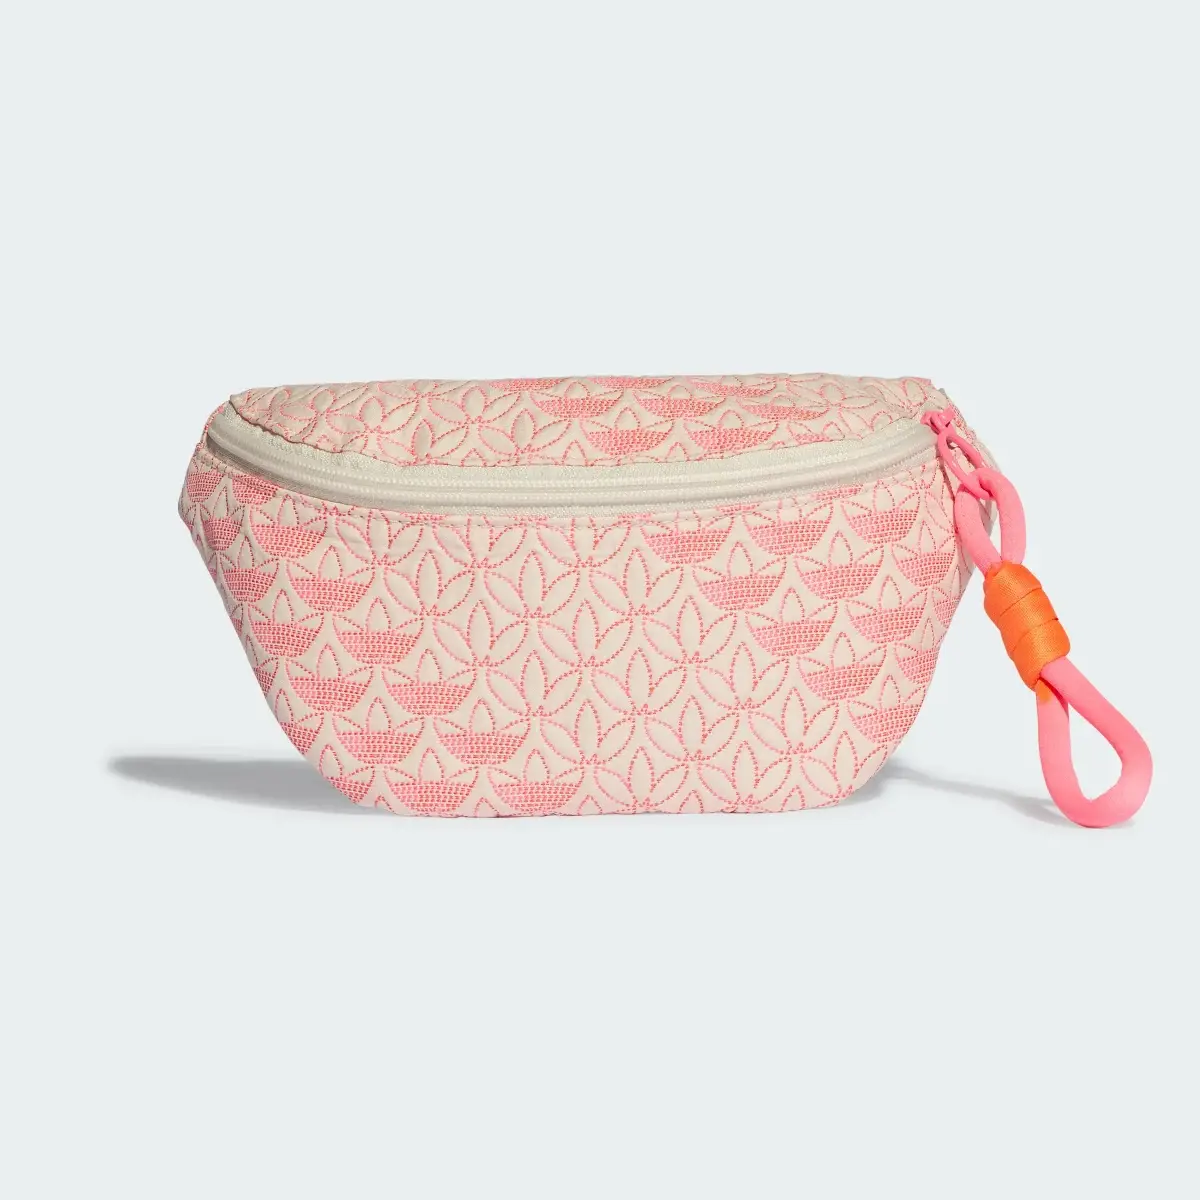 Adidas Quilted Trefoil Waist Bag. 2